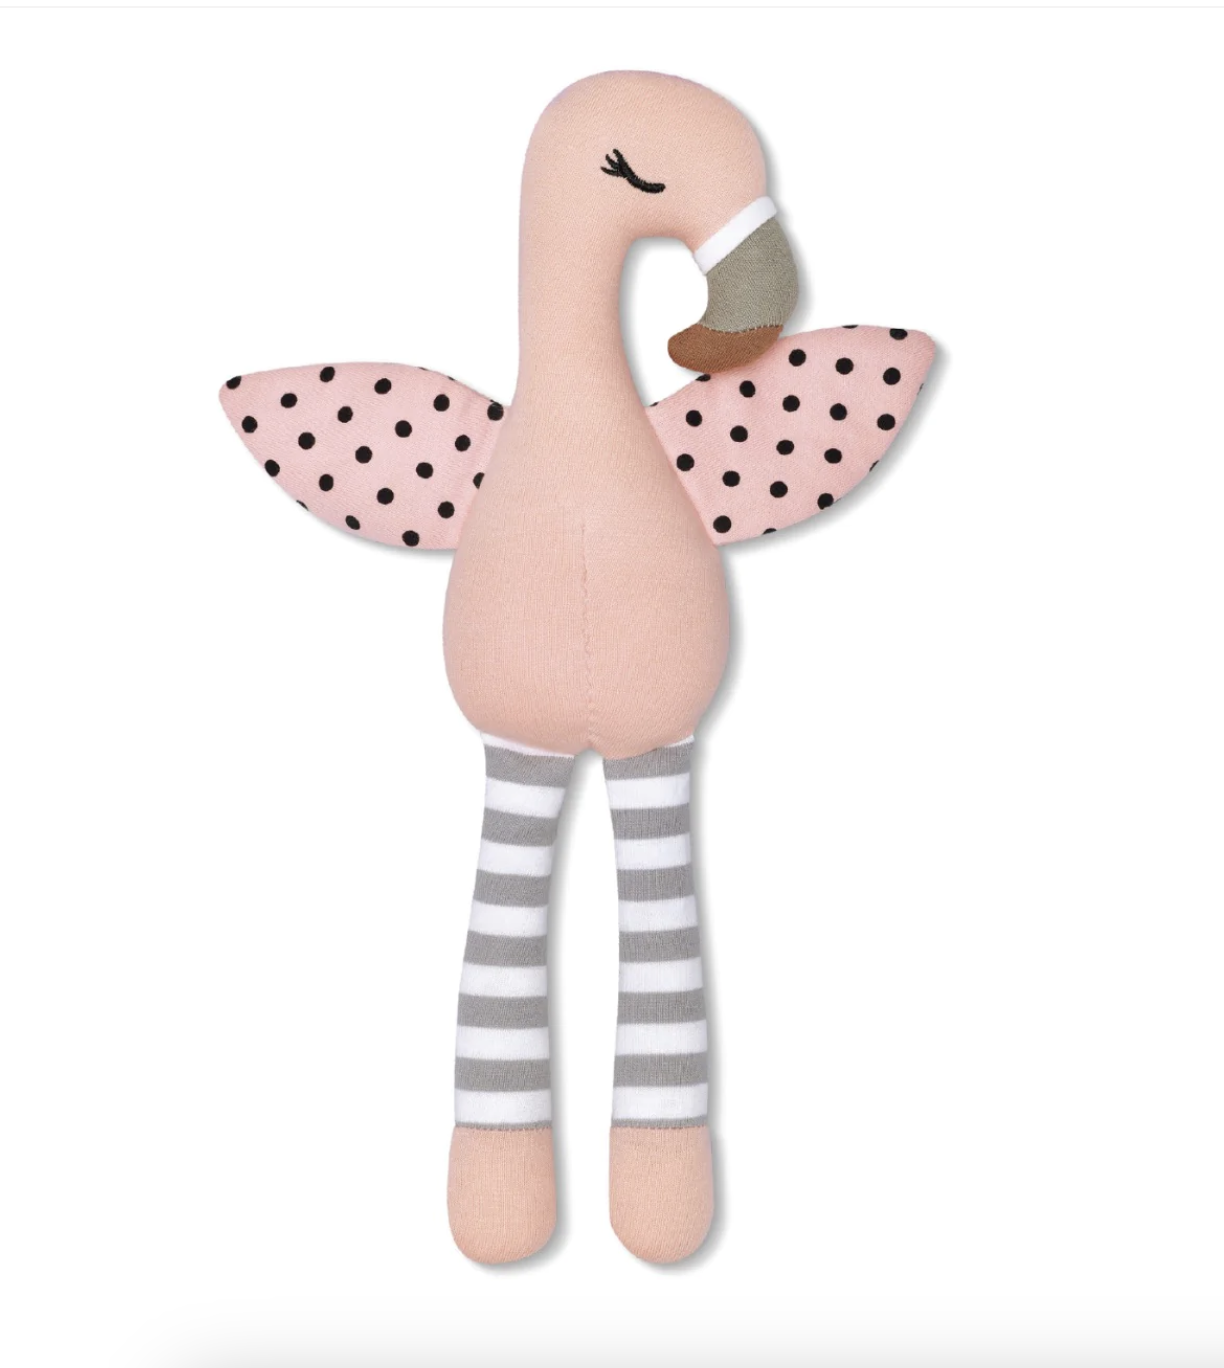 Apple Park Franny Flamingo Plush Toy review and promo code